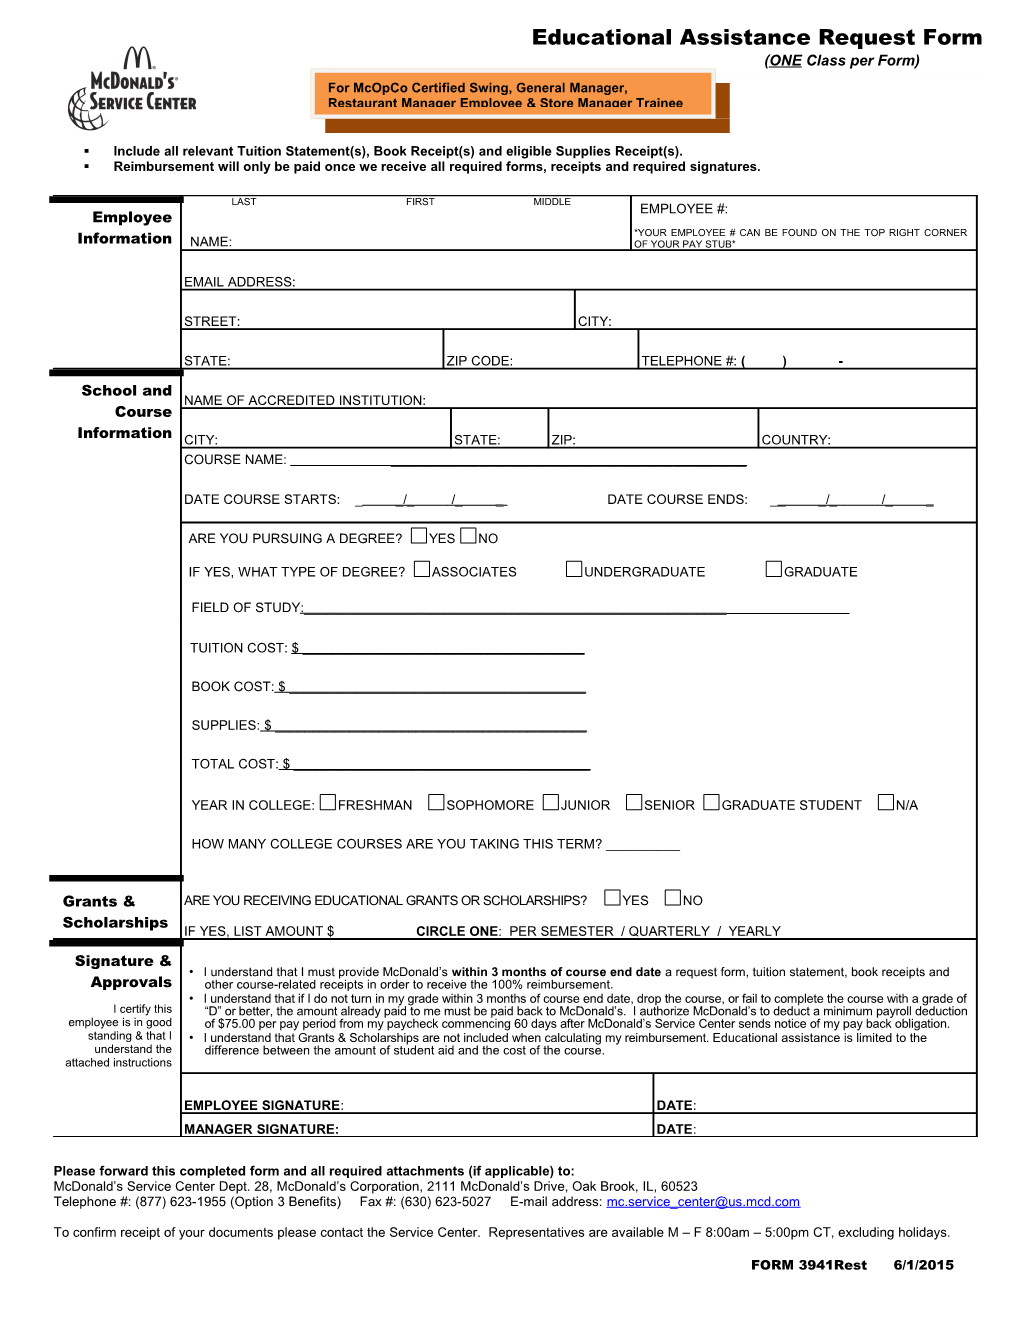 Please Forward This Completed Form and All Required Attachments (If Applicable) To